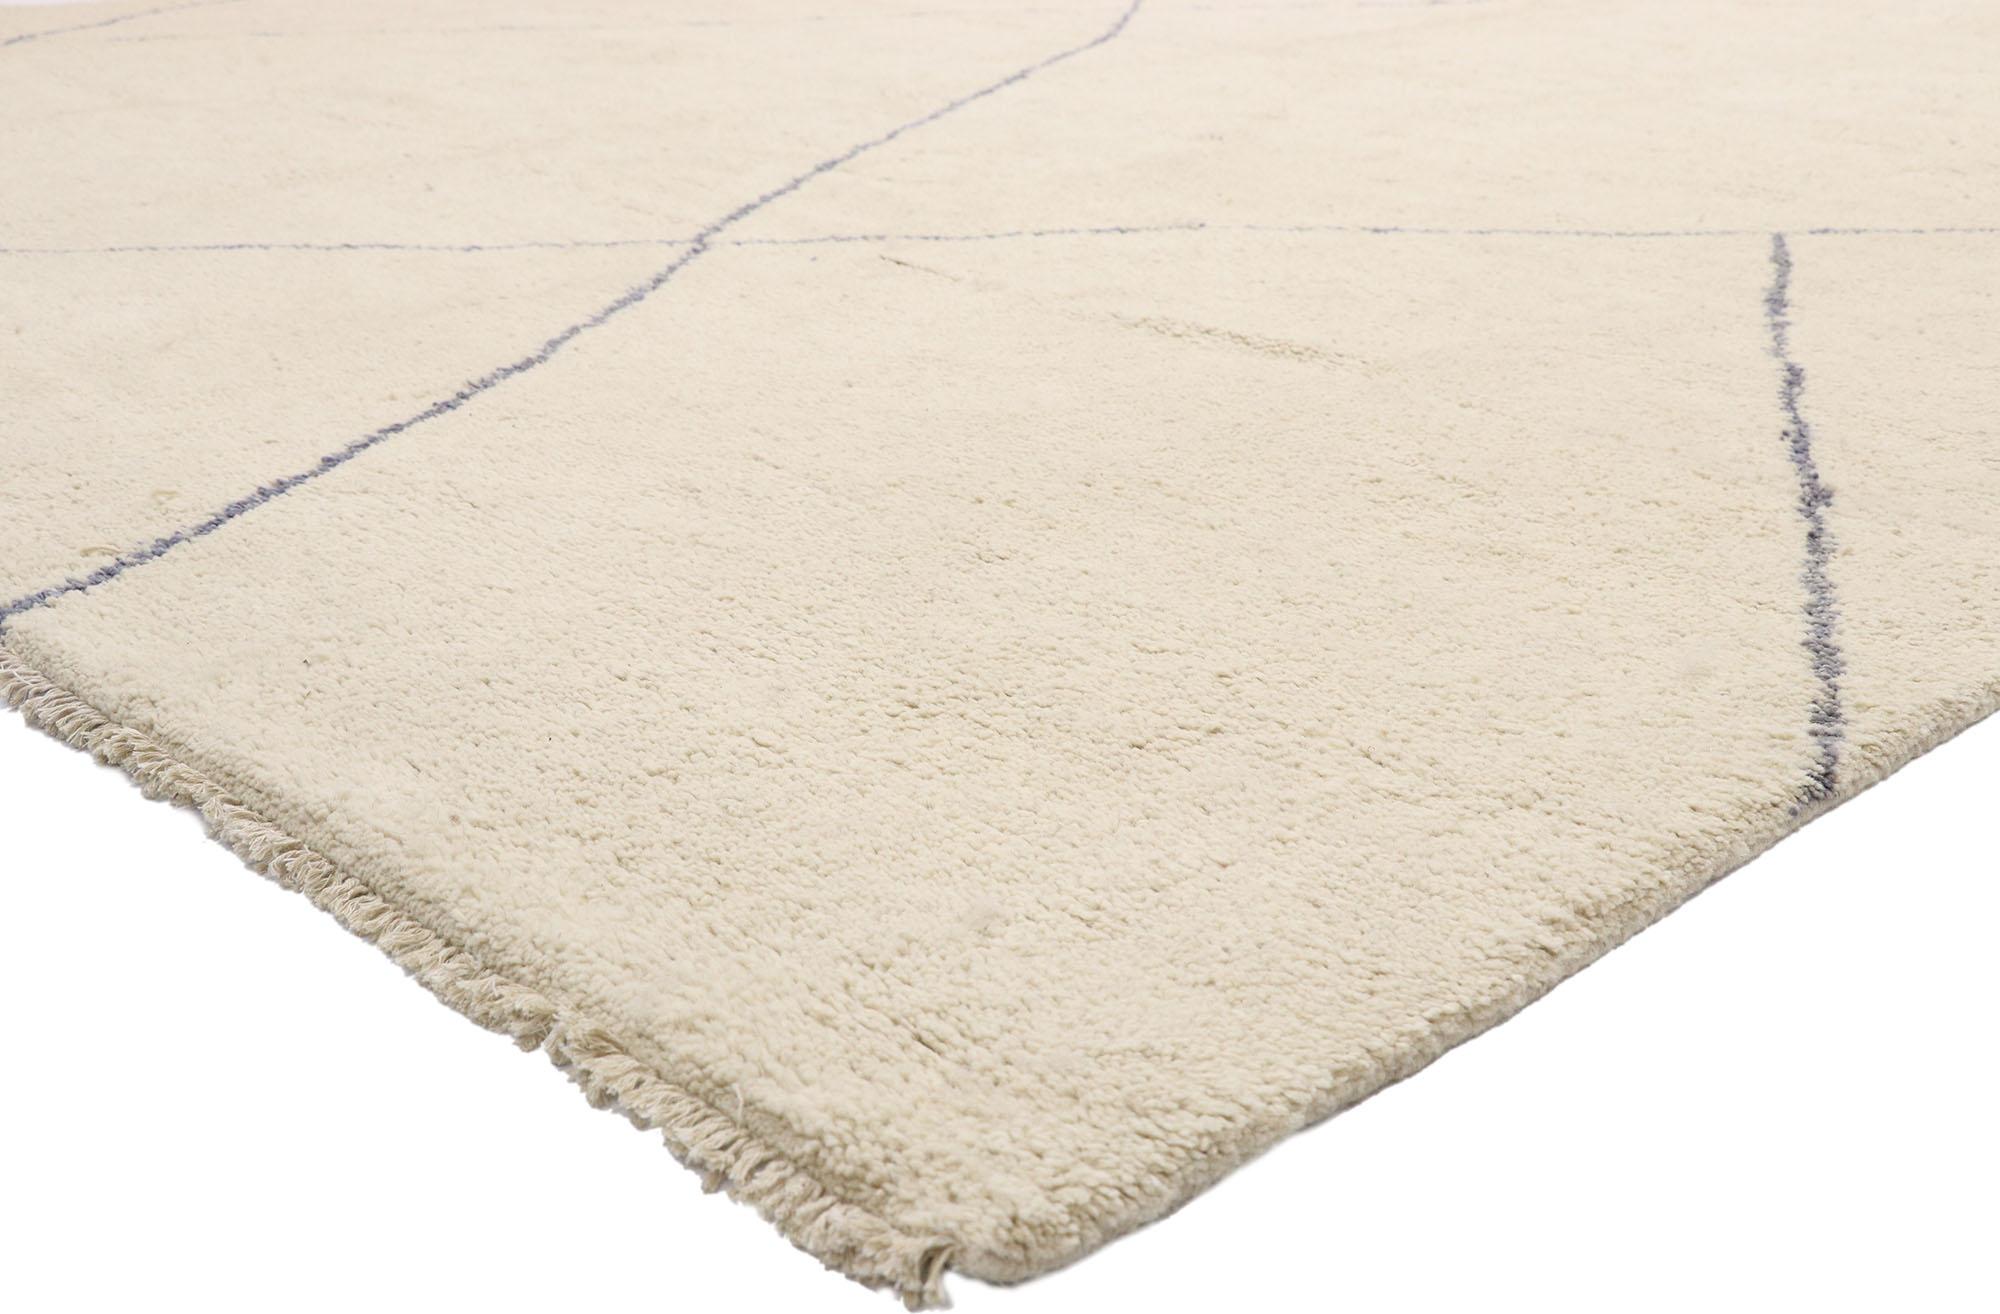 80547, contemporary large Moroccan rug with Modernist style and cozy minimalist vibes 12'01 x 16'01. This hand knotted wool contemporary Moroccan style rug features contrasting cool slate lines running the length of the creamy-vanilla field. The